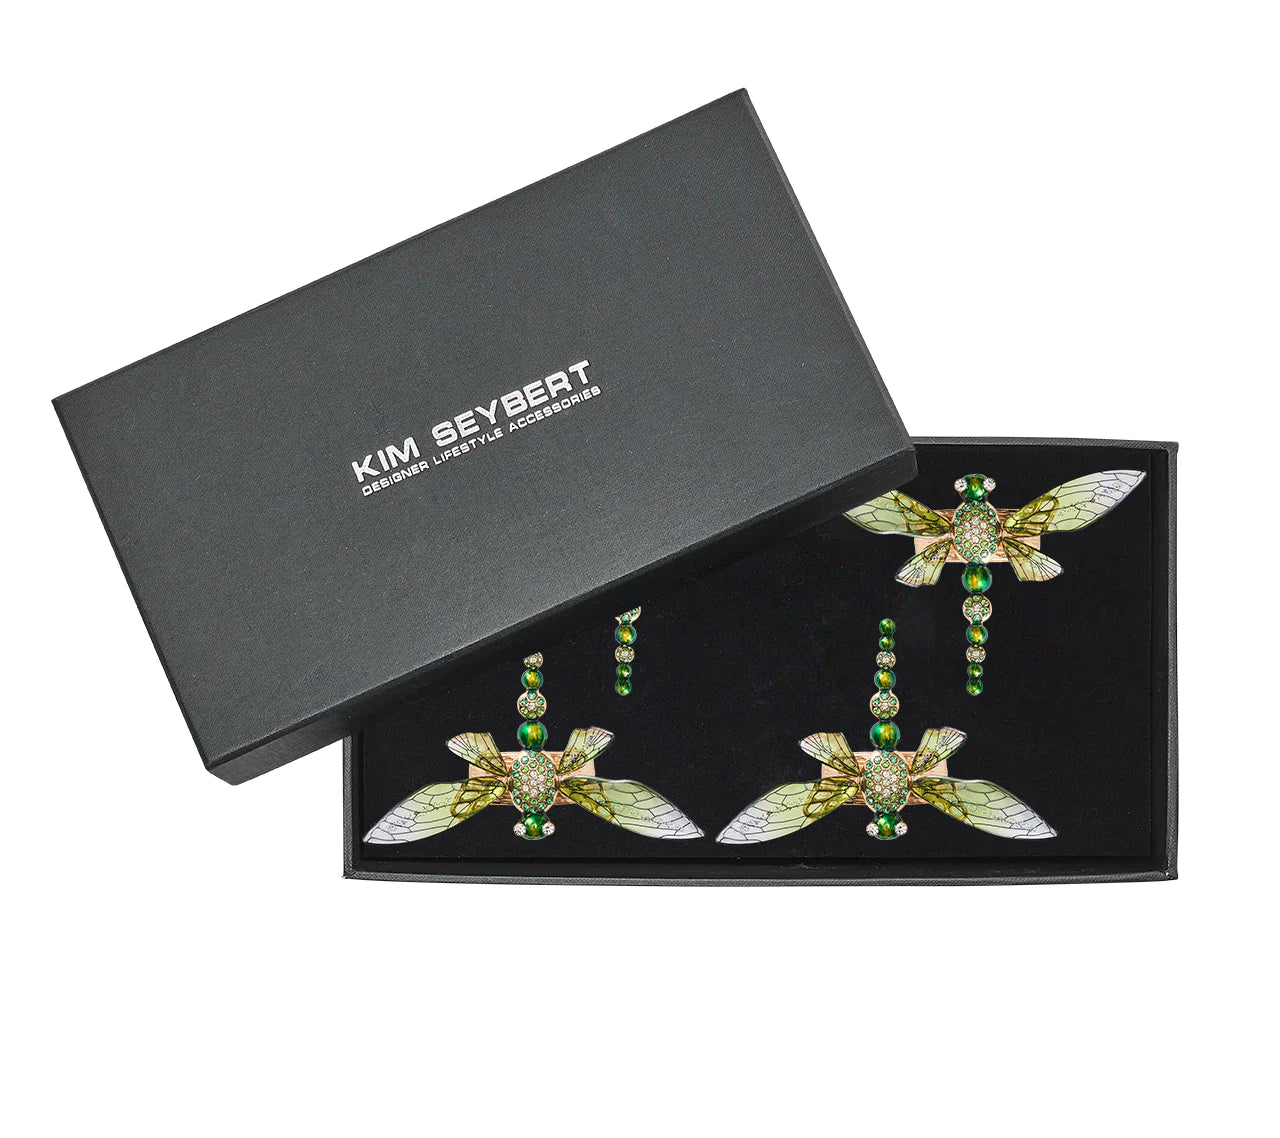 Dragonfly Napkin Ring in Green, Set of 4 in a Gift Box